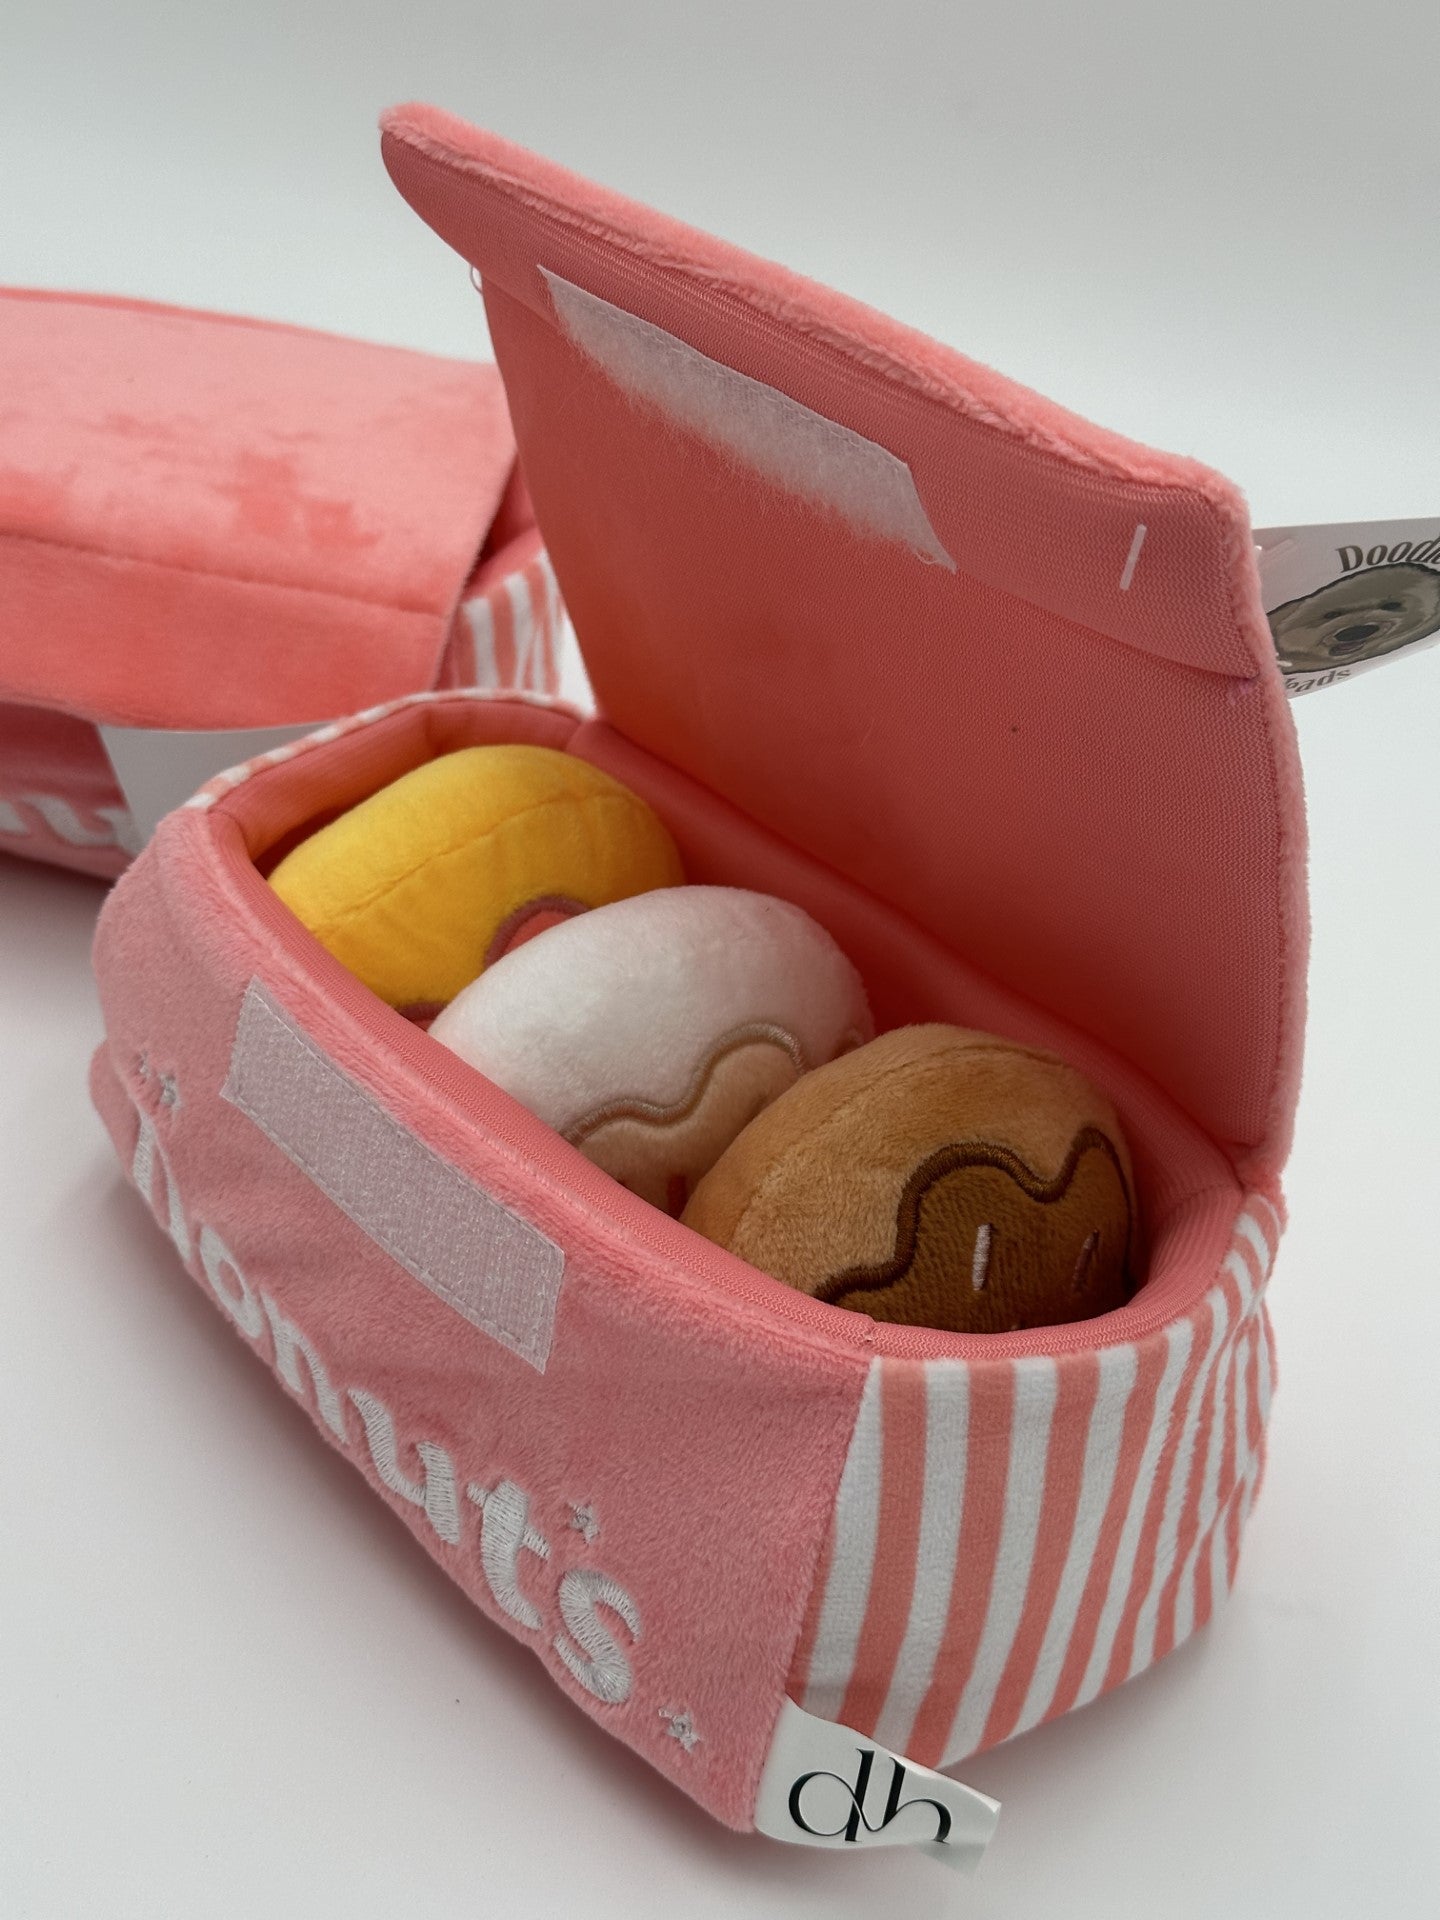 dh Doodle Head Box Of Squeaky Donuts for Small & Medium Doodles - Interactive Dog Toy Set